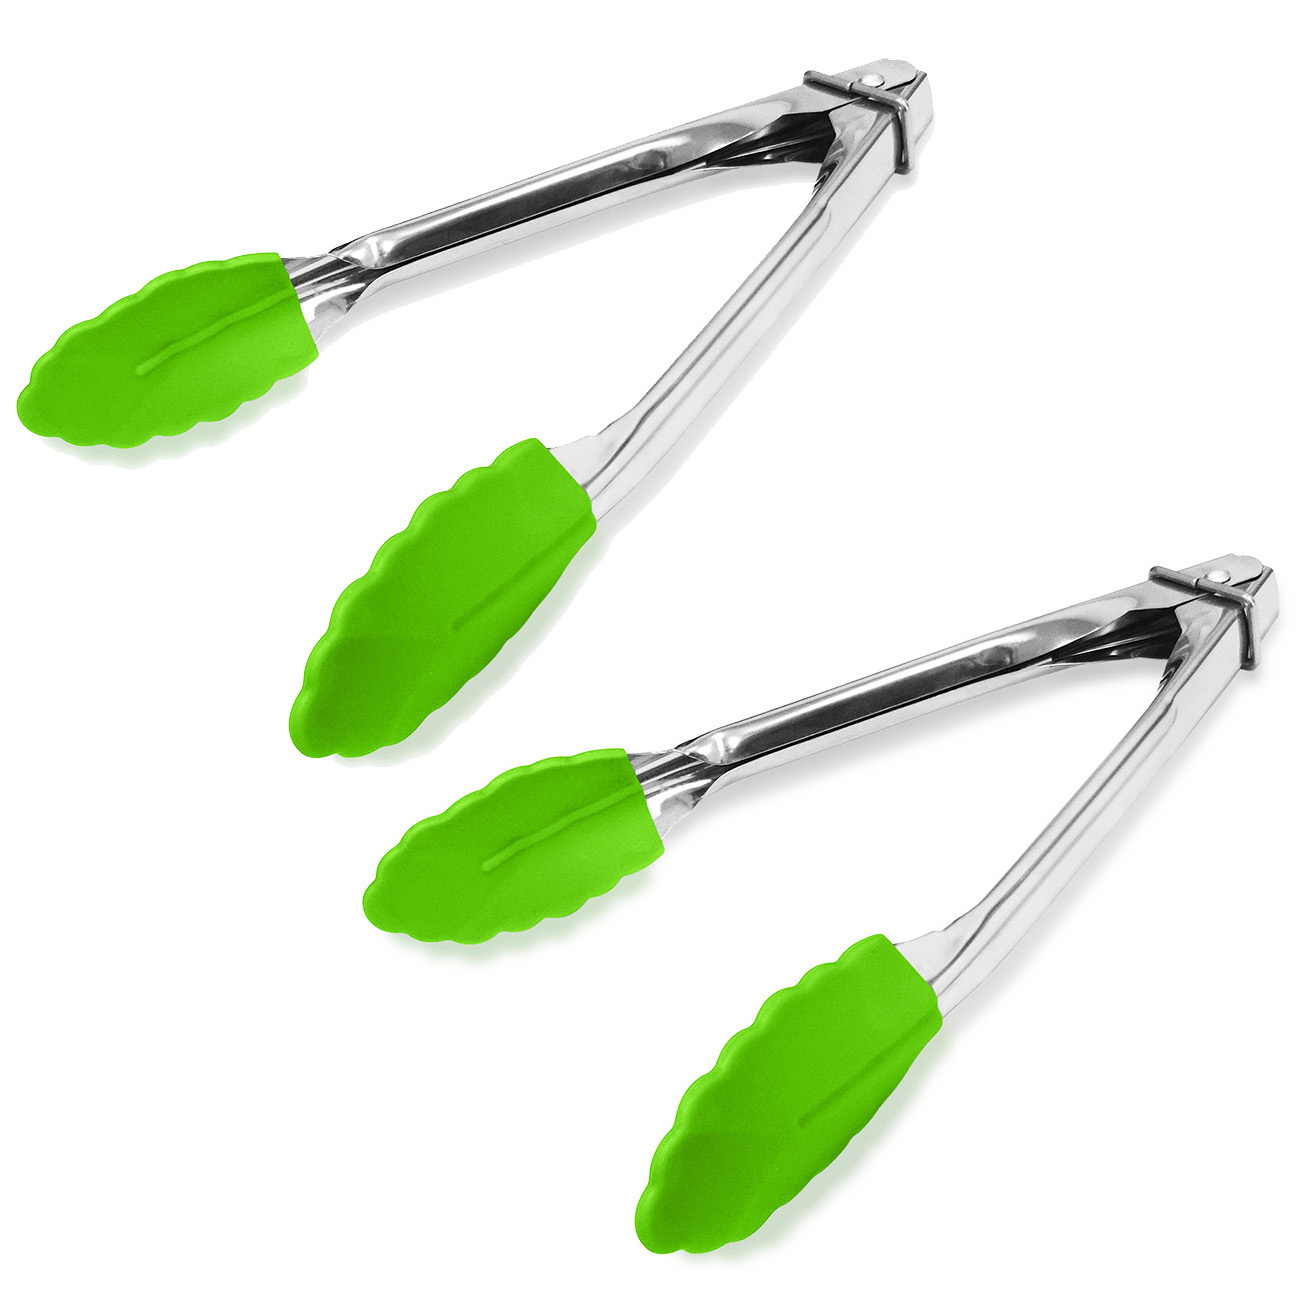 18cm Good Grip Stainless Steel Mini Tongs with Silicone Head - Green